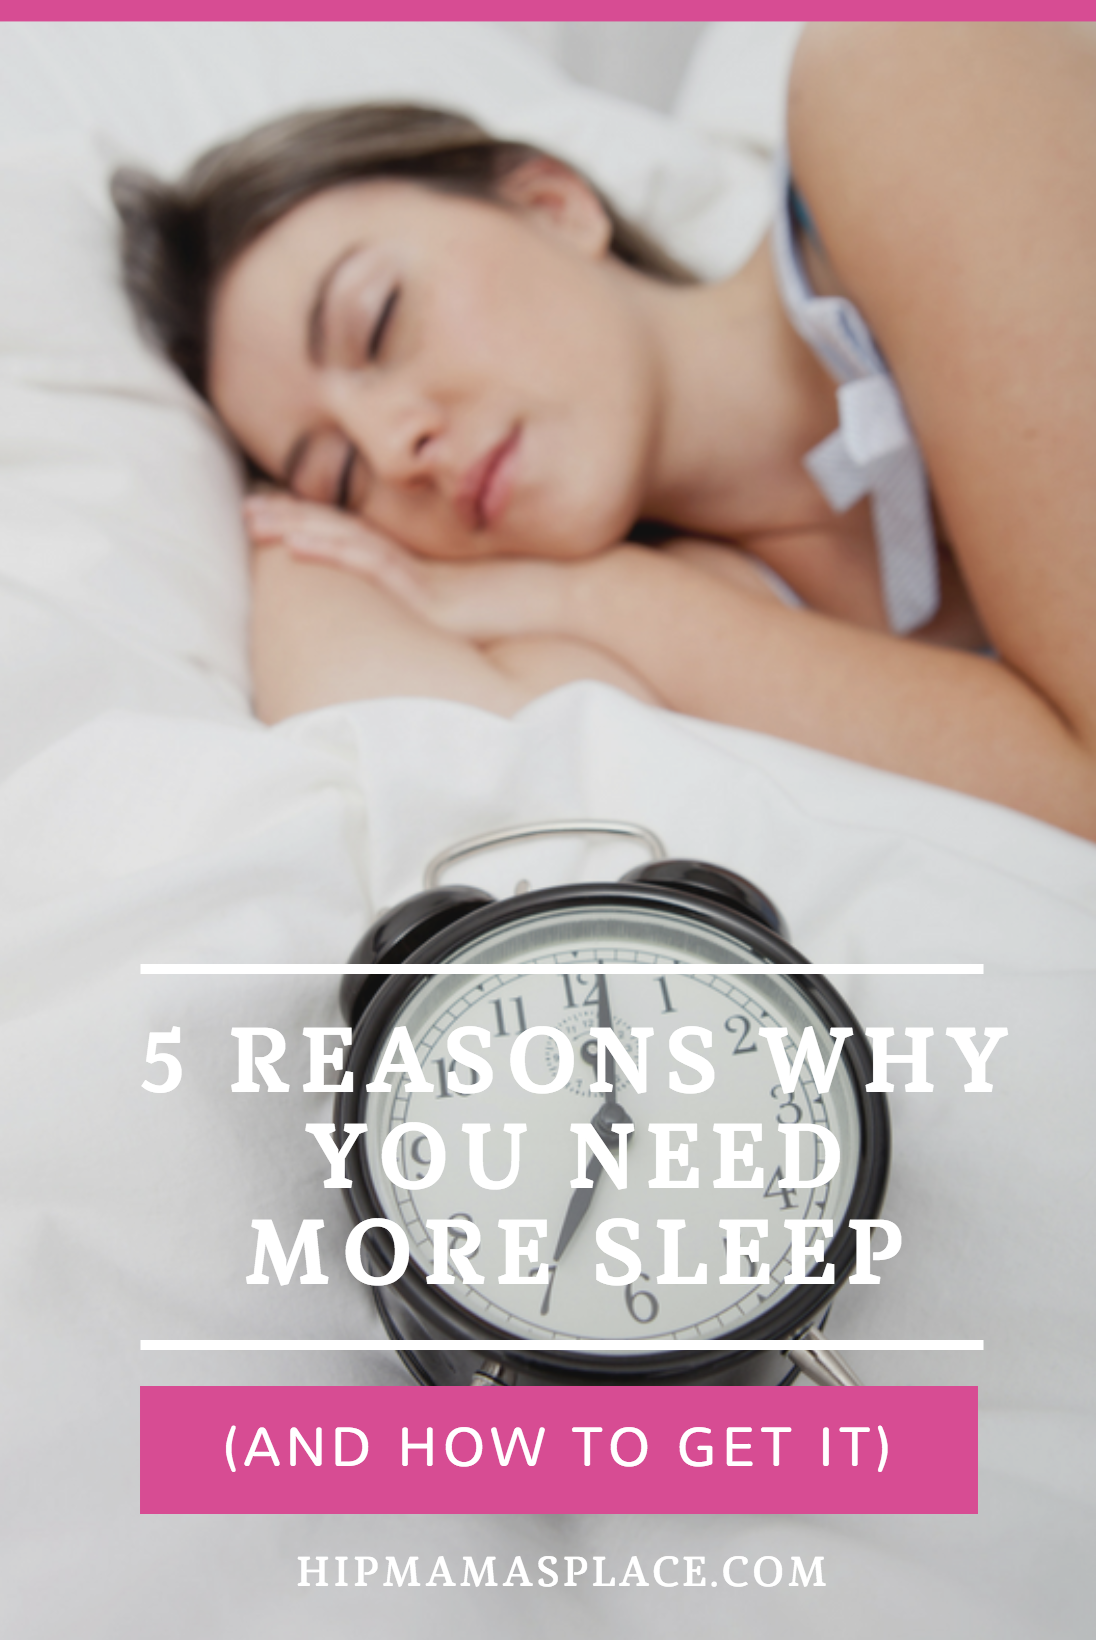 Sleep is one of the most important parts of each and every day. Here are 5 reasons you need more sleep and how to get it.